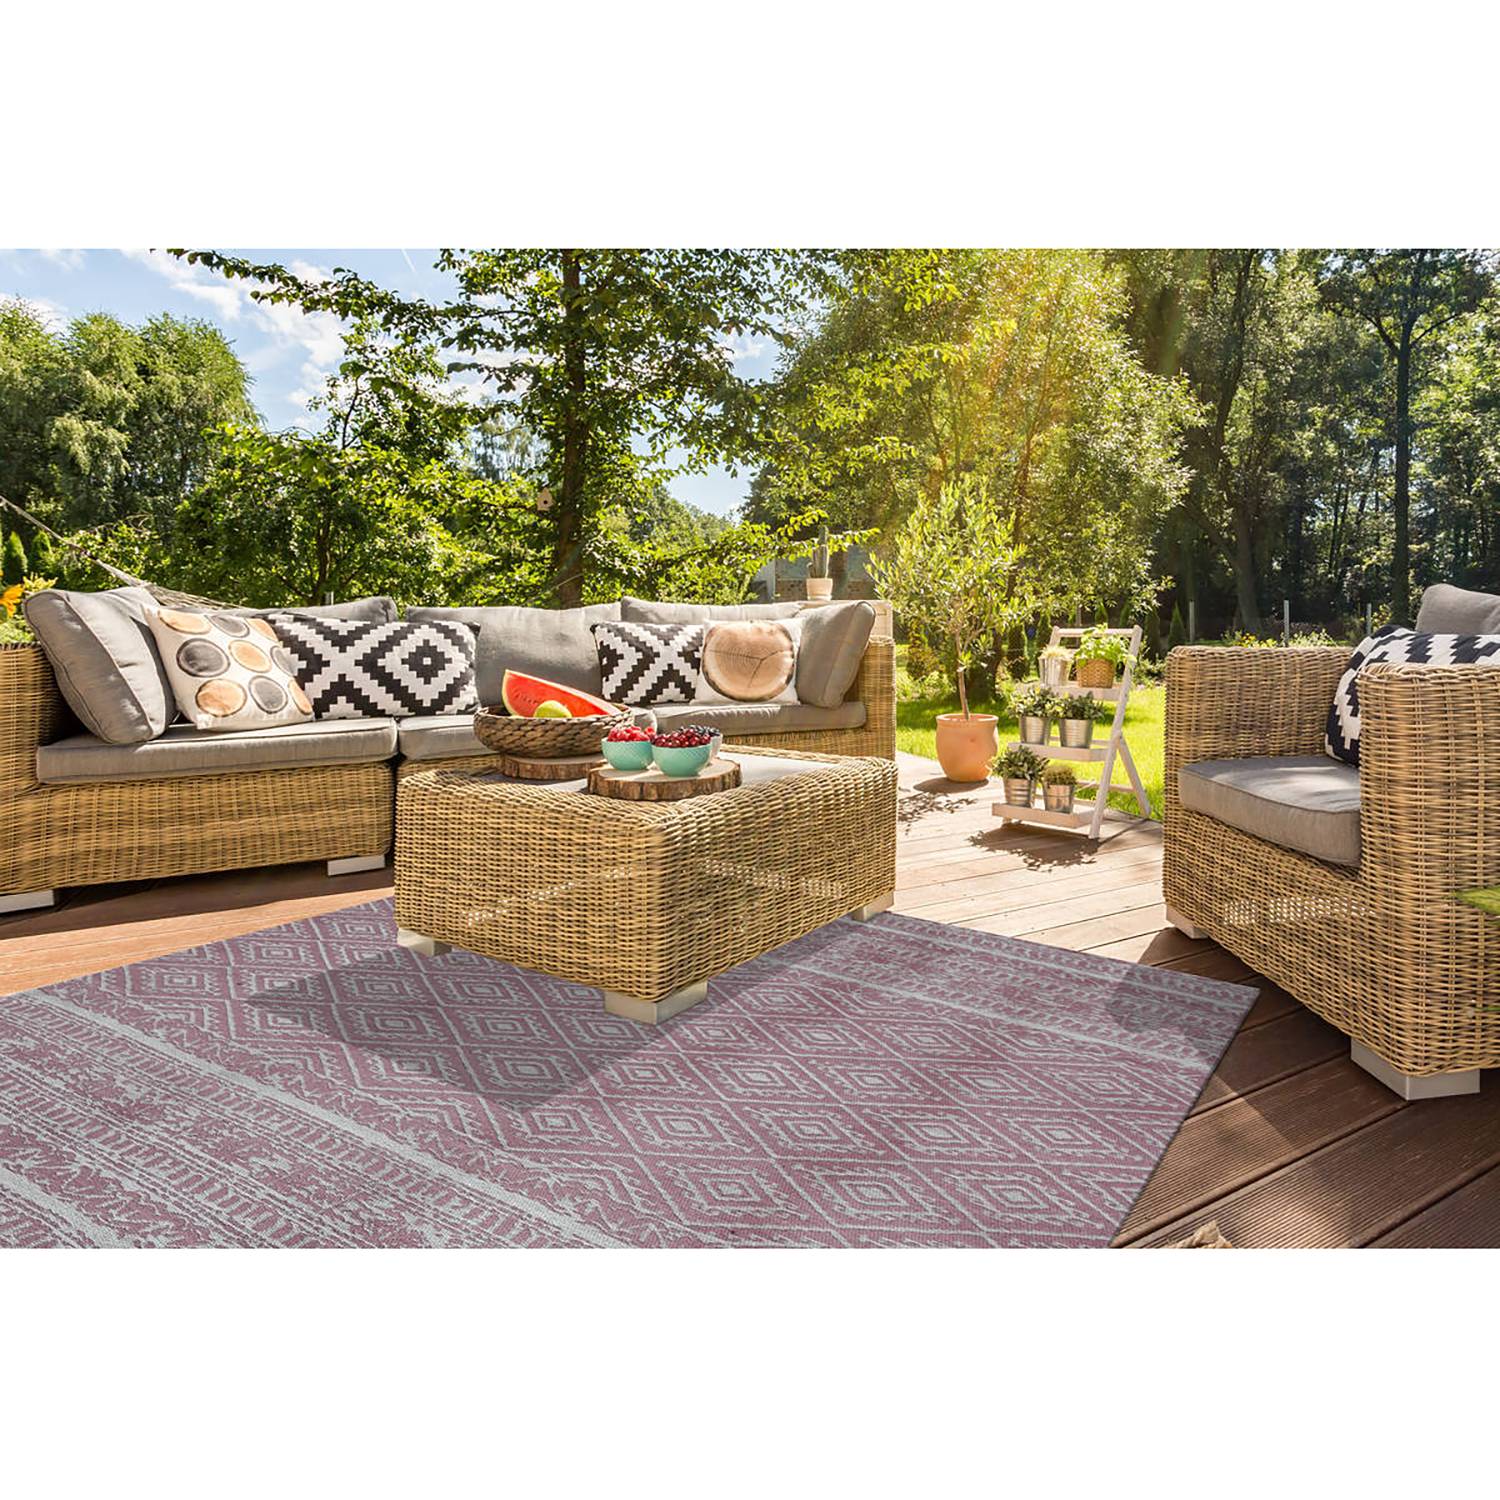 In-/Outdoorteppich Sunny 110 